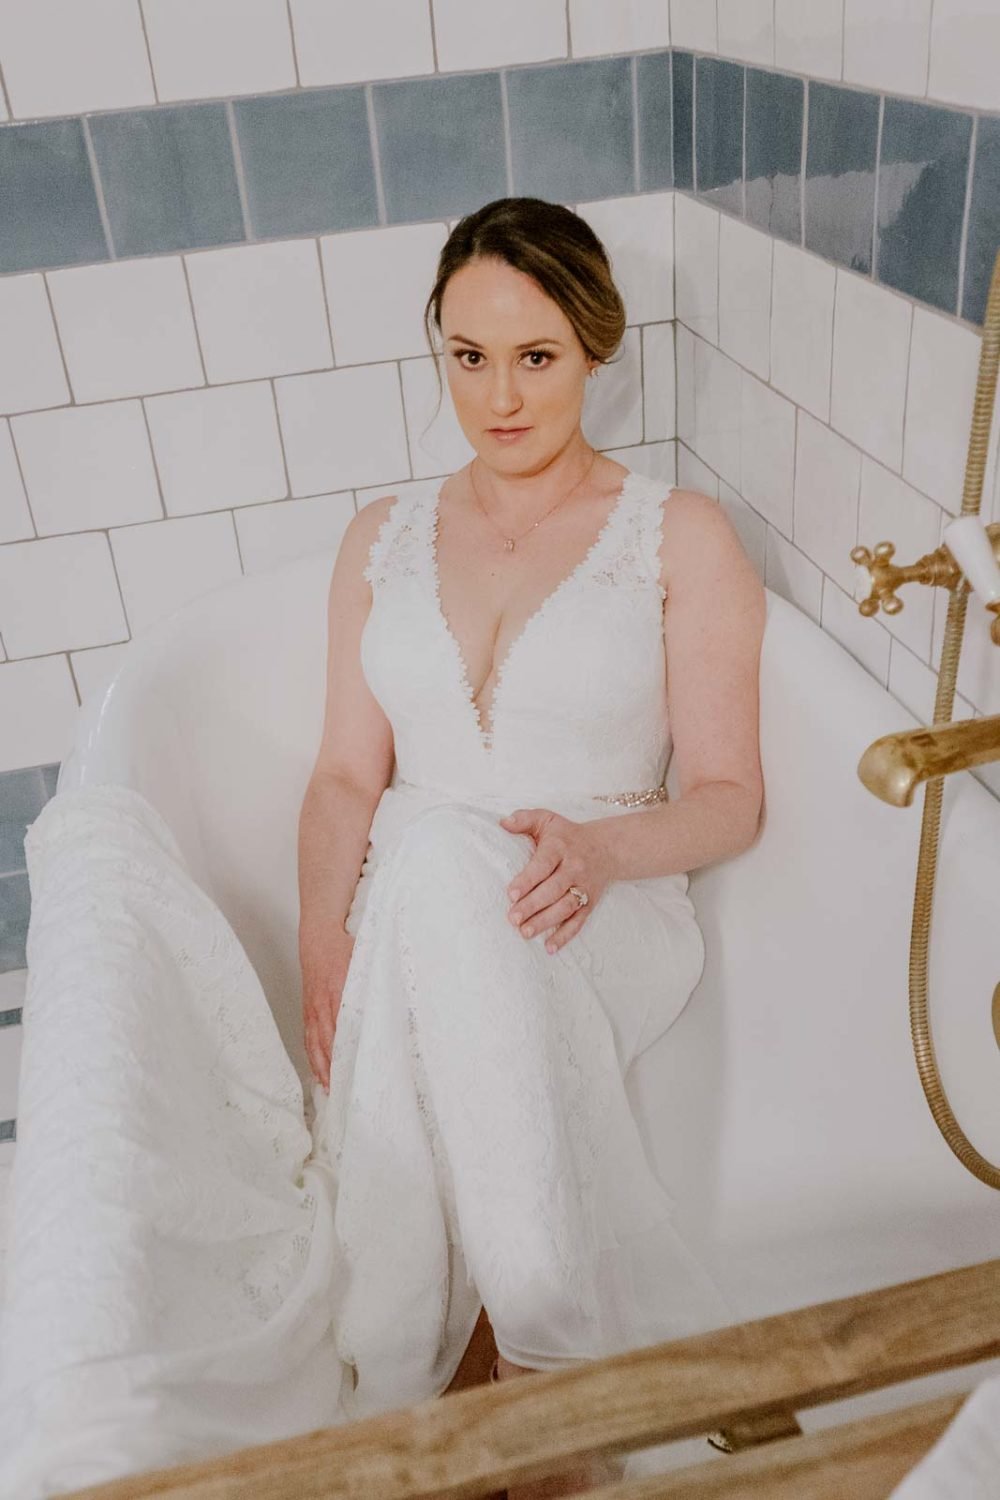 A beautiful bride in her gorgeous gown set an a bath tub posing for a photograph at Hotel Emma in her suite